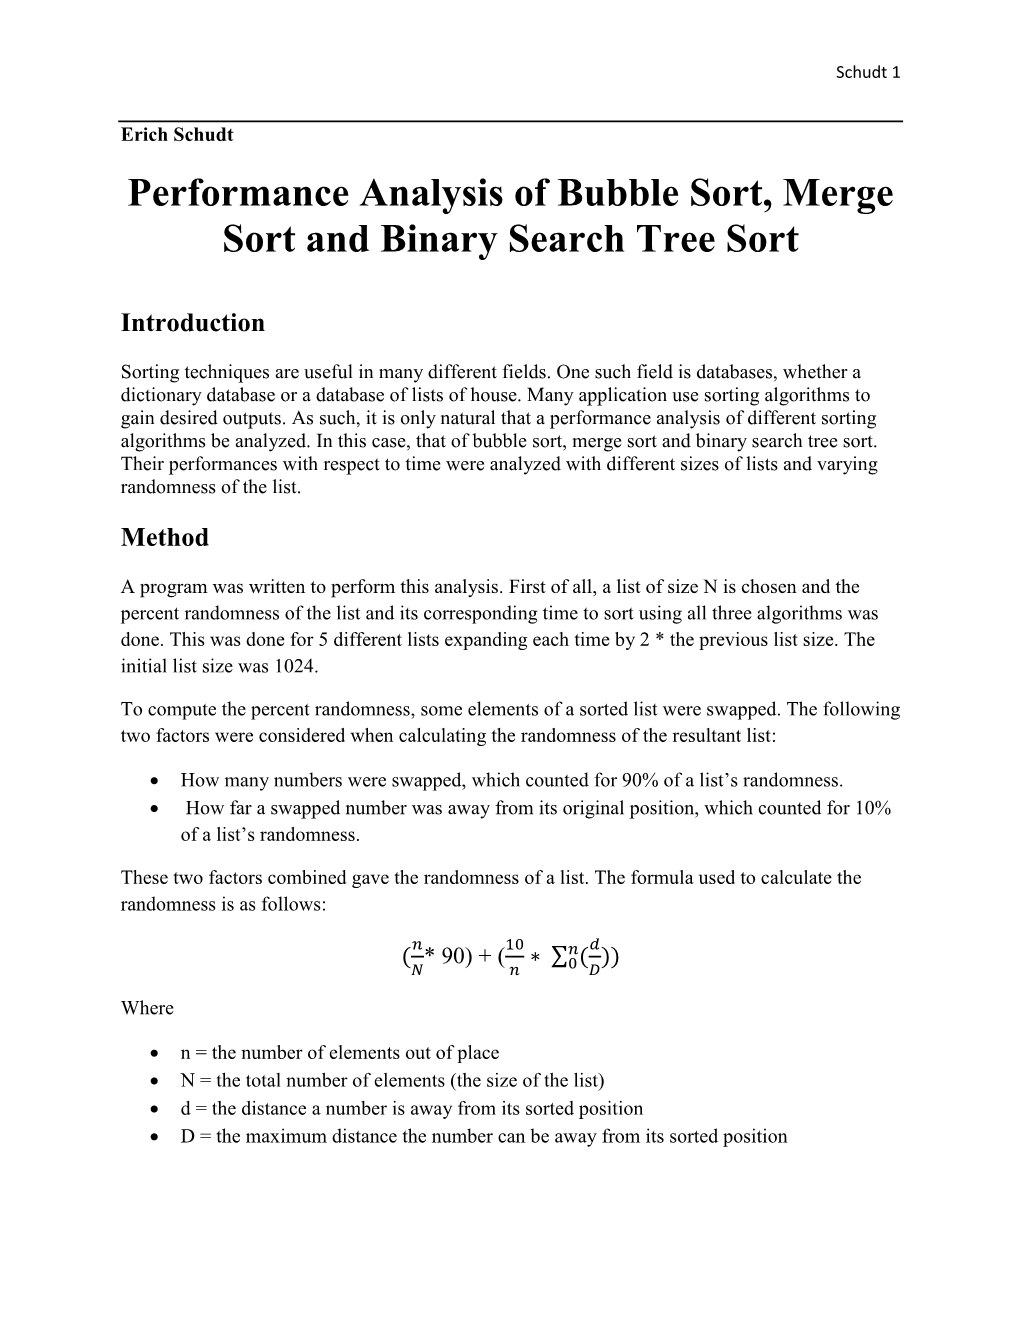 Performance Analysis of Bubble Sort, Merge Sort and Binary Search Tree Sort